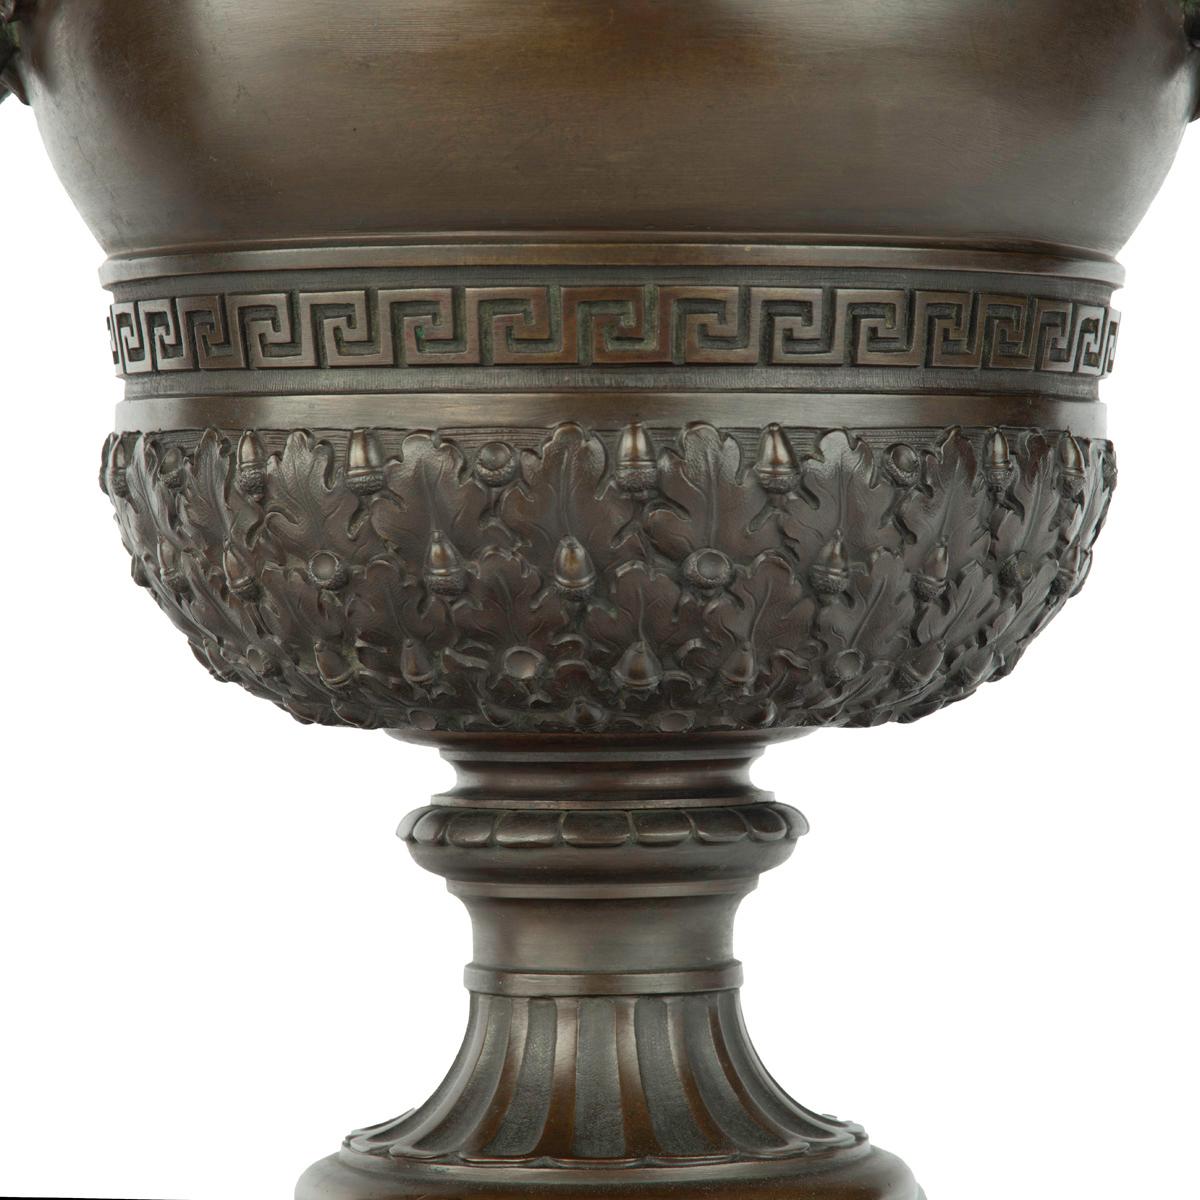 A pair of Belgian bronze urns by Luppens, Brussels, each in the form of a classical two-handled vase, decorated in high relief with bands of acorns on dense foliage, Greek key pattern and scrolls with shells, the handles comprising double headed